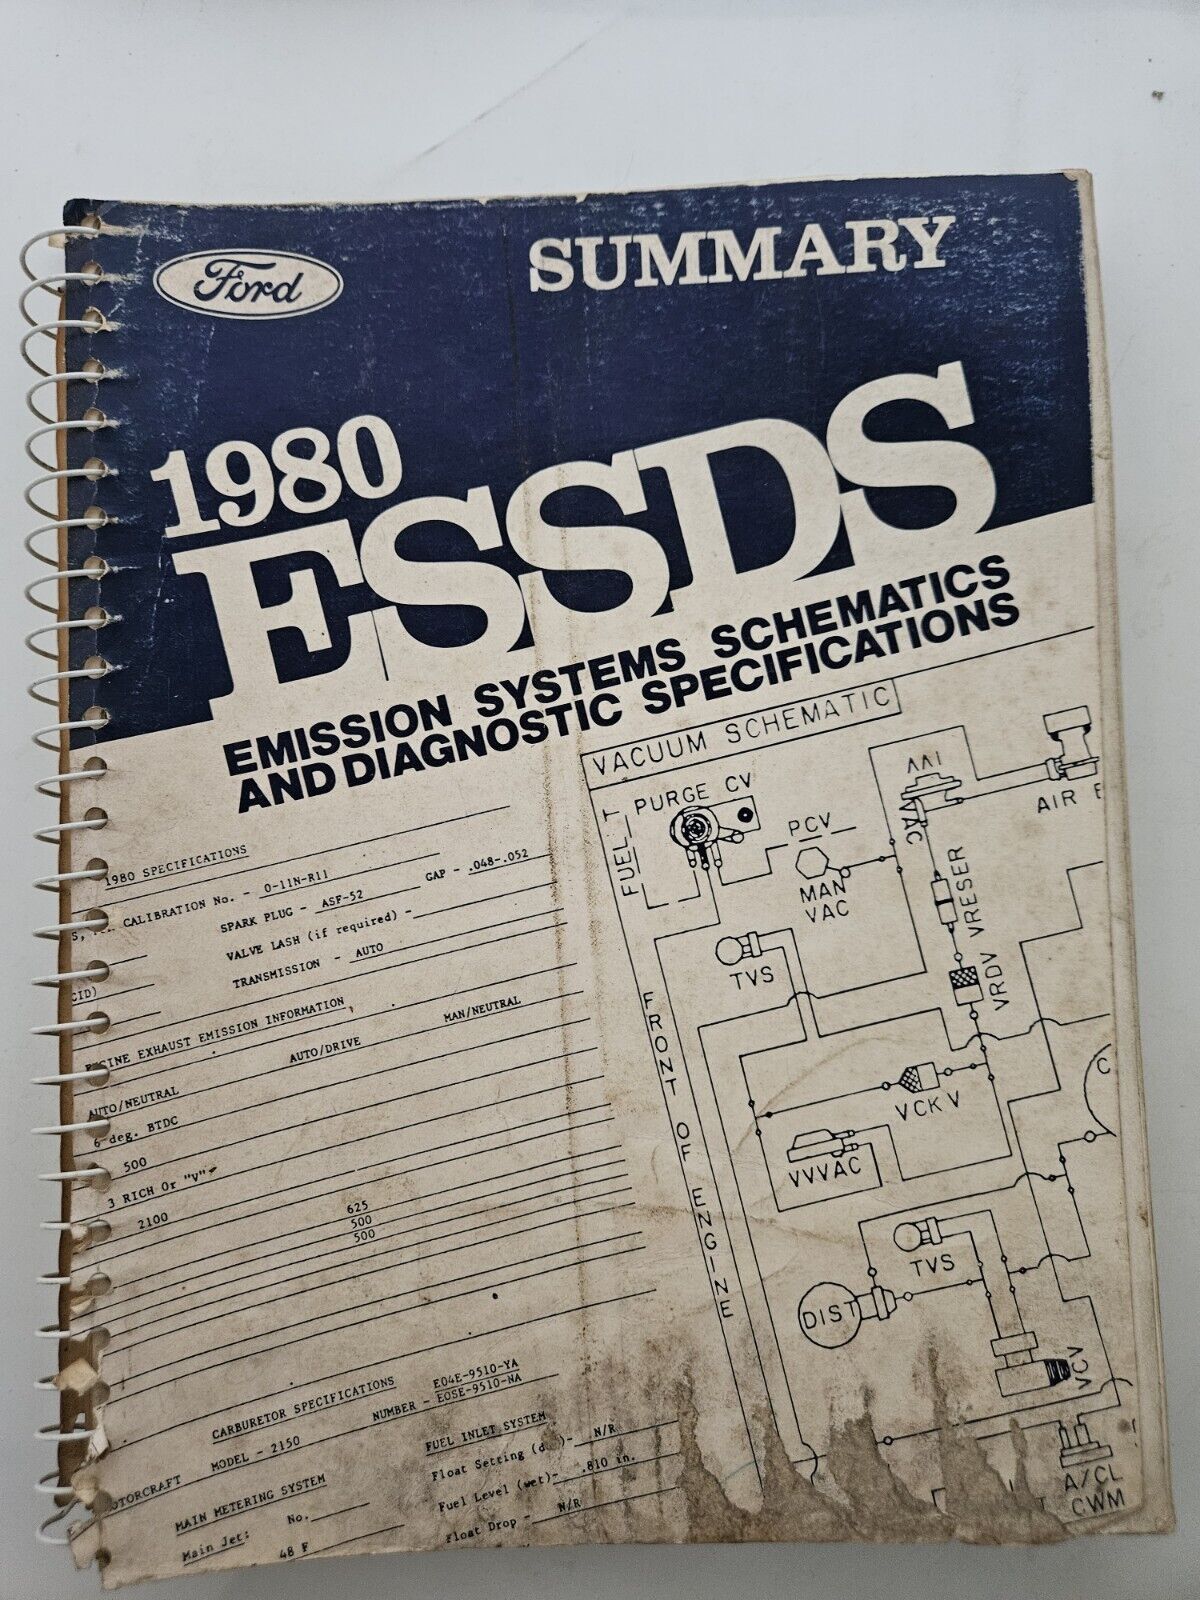 1980 FORD ESSDS EMISSION SYSTEMS SPECIFICATIONS SOFTCOVER BOOK 